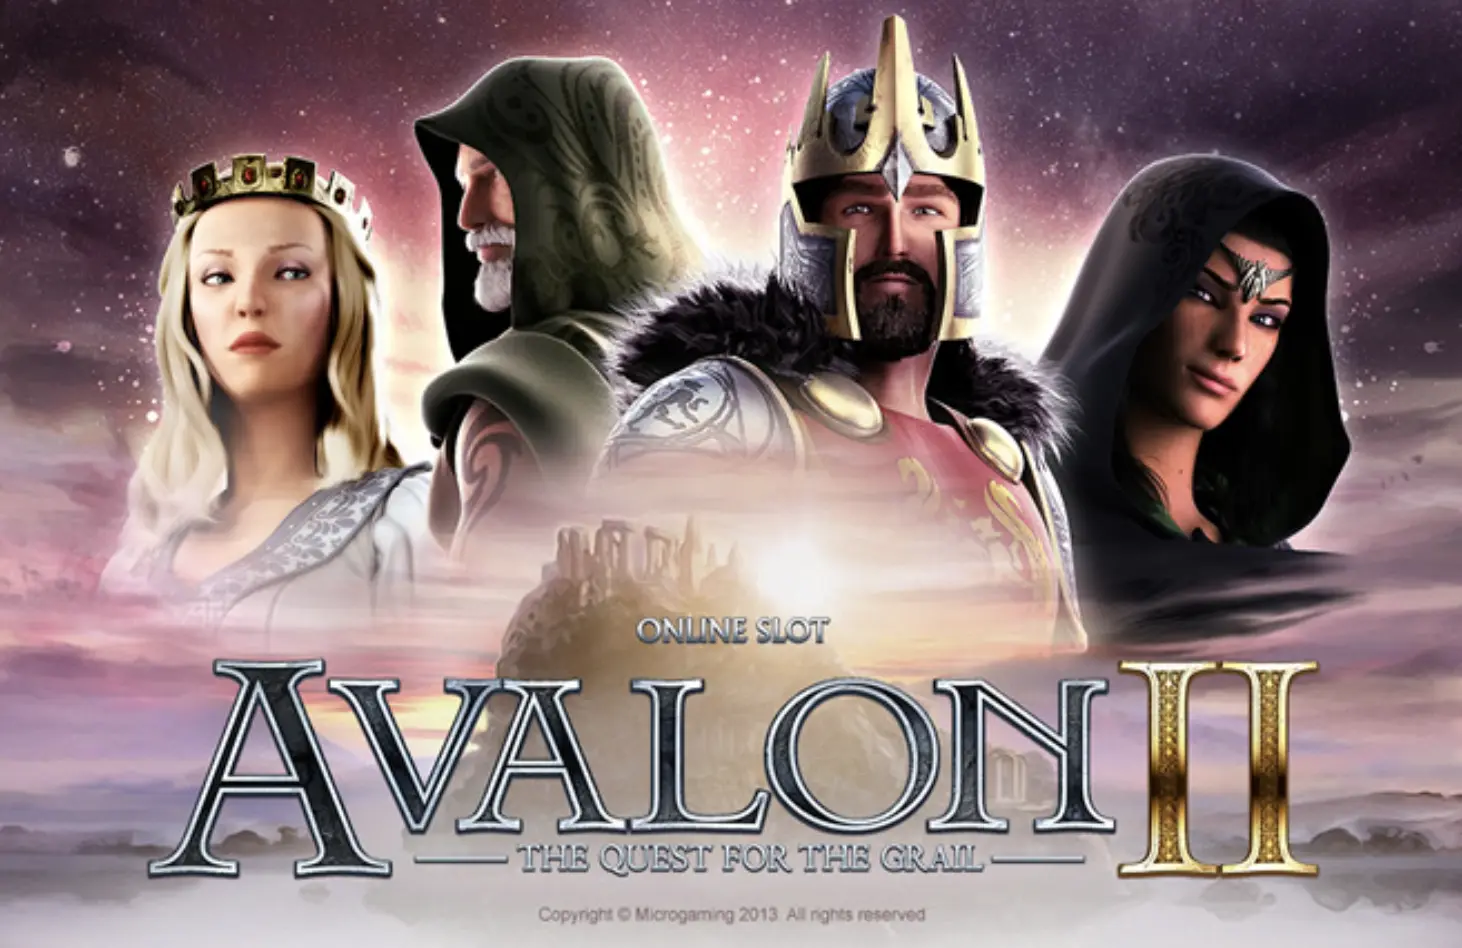 Avalon 2 – Quest for the Grail